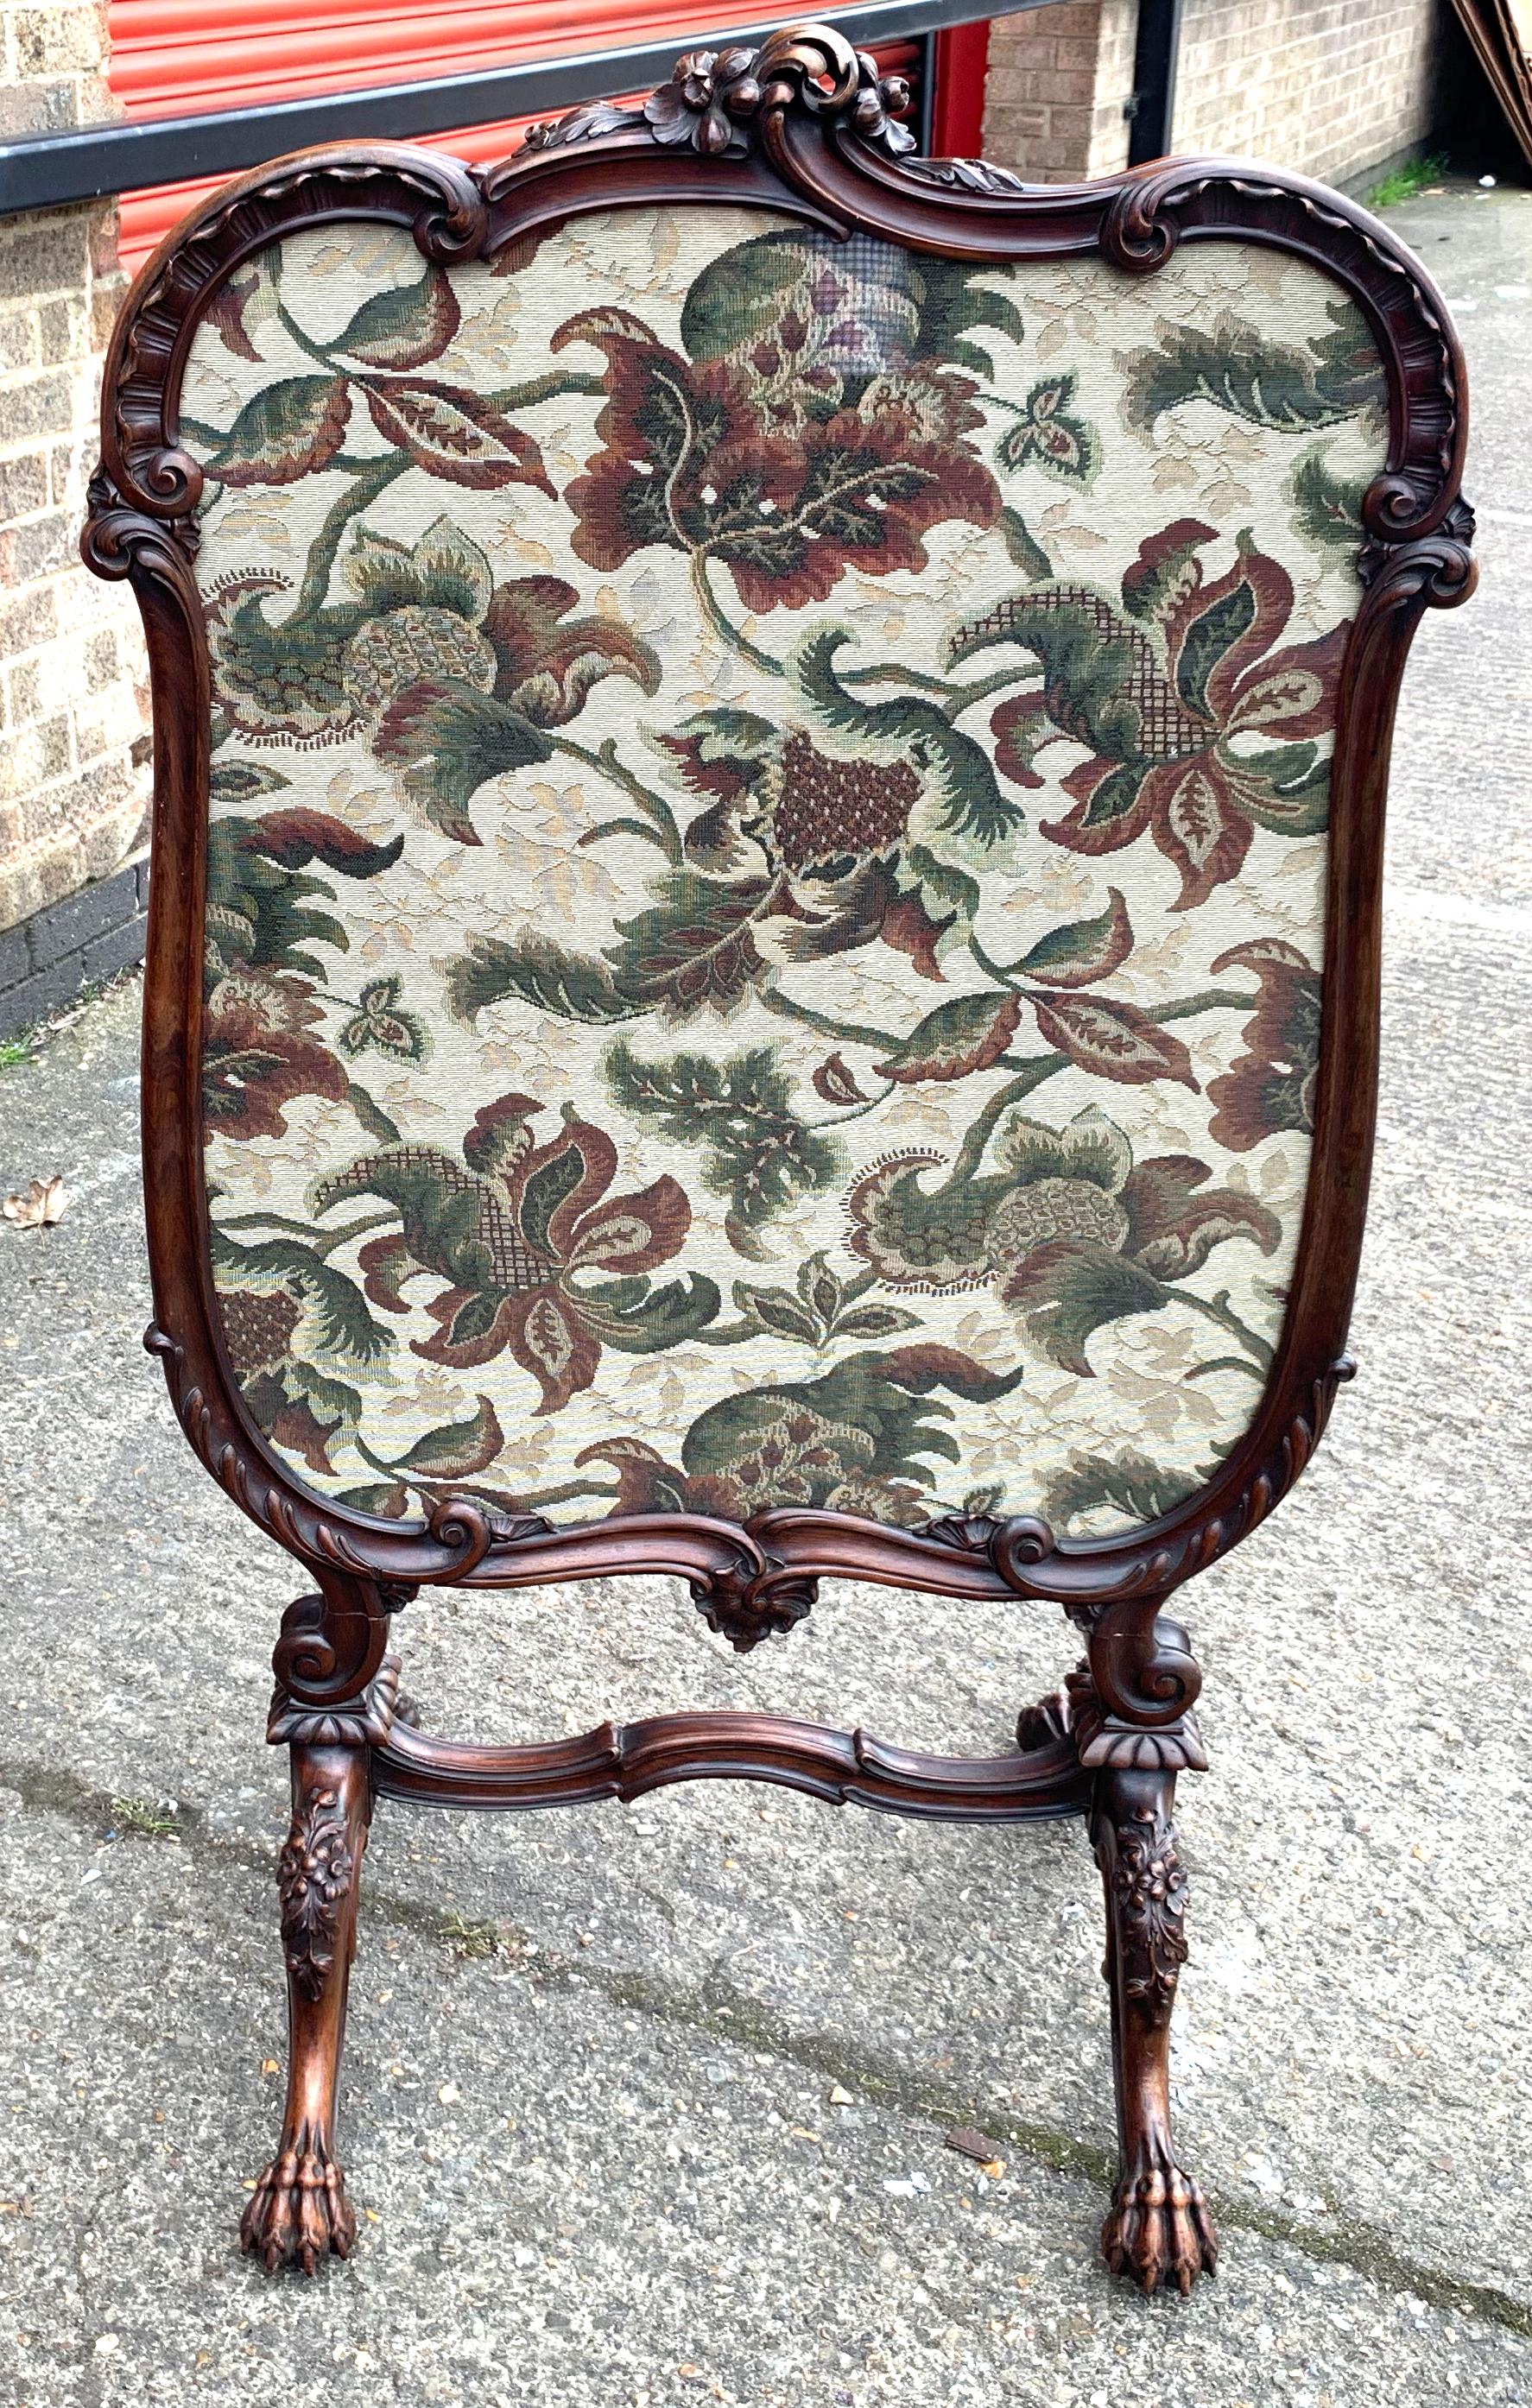 A fine Walnut framed fire screen with woolwork Tapestry screen. Early 19th century. The carved framed enclosing a panel handworked with flowers and foliage. On scroll legs with conforming cross stretcher terminating in paw feet.